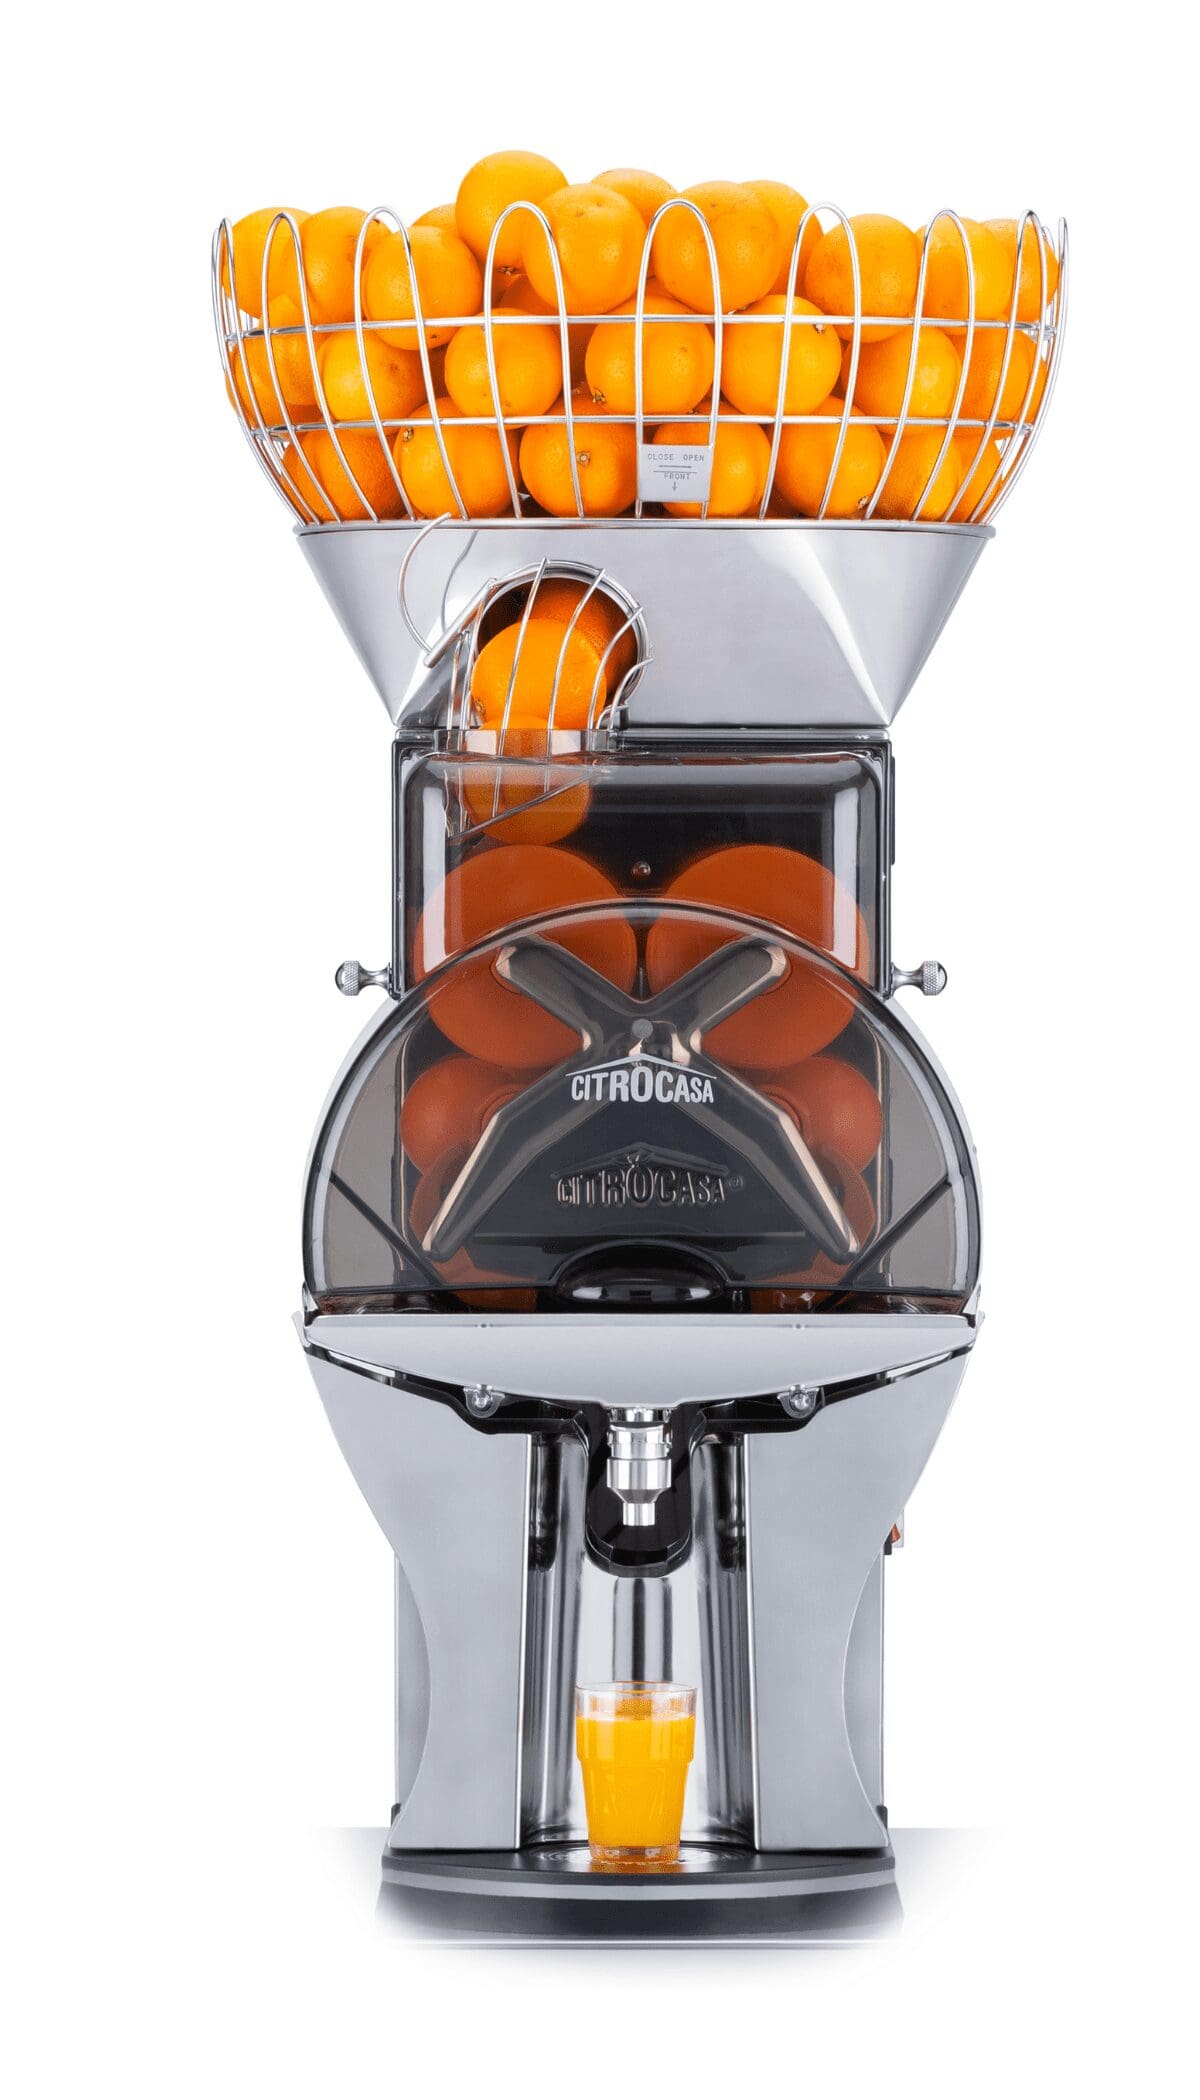 A Citrocasa commercial juicer filled with whole oranges in a basket on top and sections ready for juicing below. The machine is dispensing fresh citrus juice into a glass placed at the bottom outlet. The machine has a sleek, modern design with a metallic finish, embodying the excellence of Citrus America.